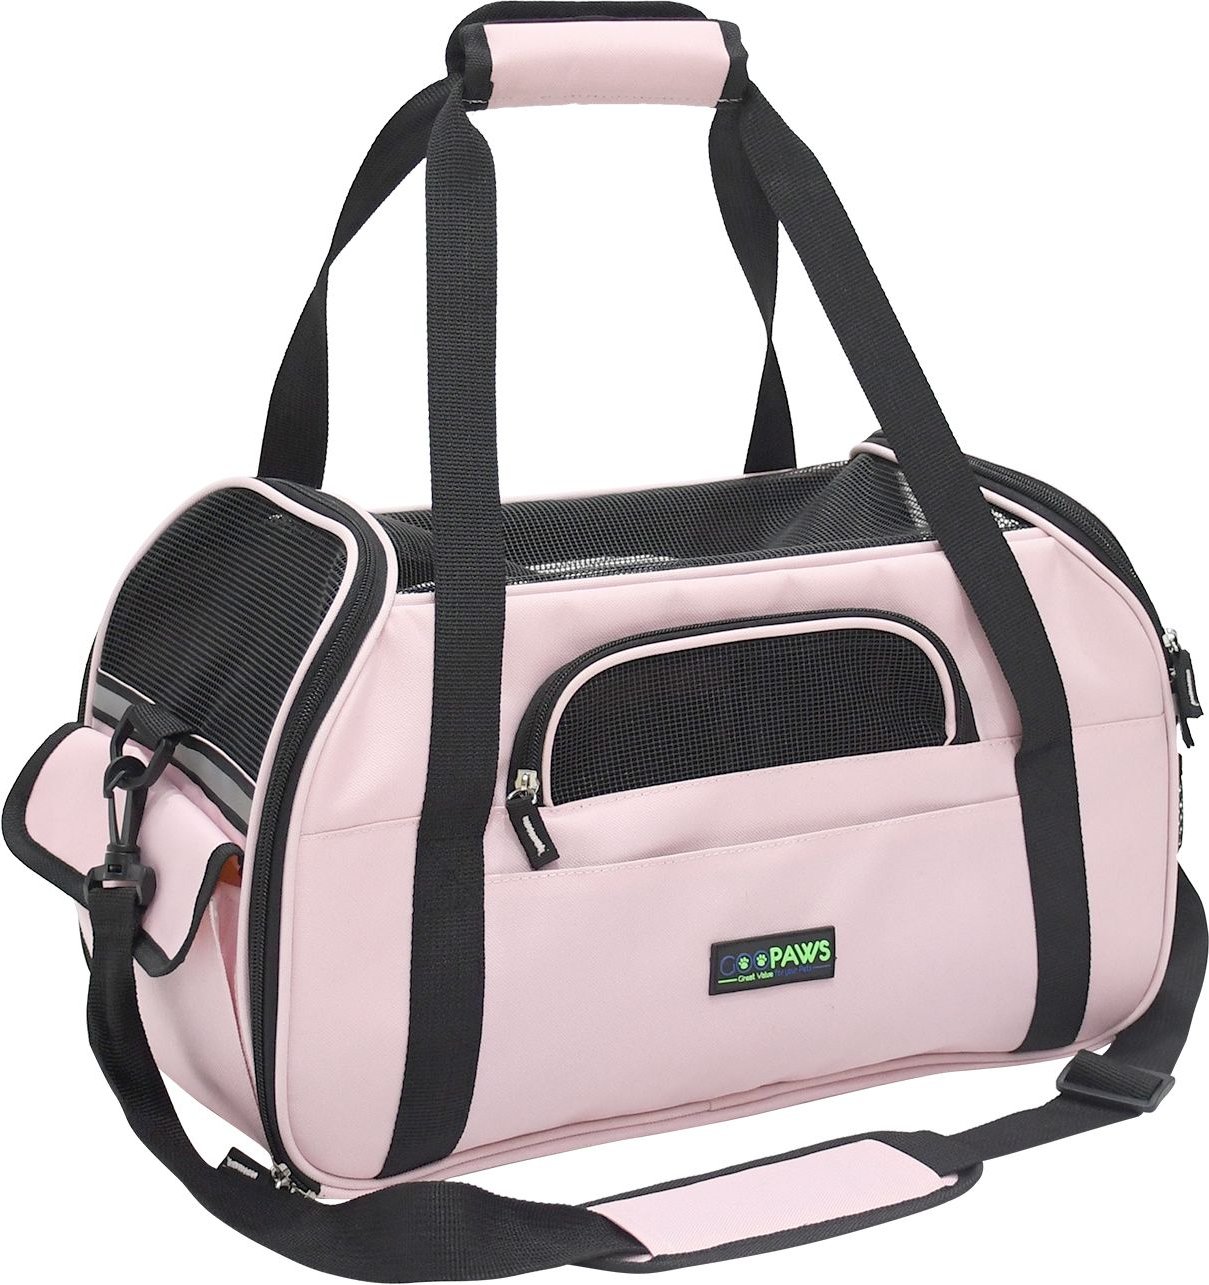 ZAMPA Soft-Sided Airline-Approved Dog & Cat Carrier Bag, Pink